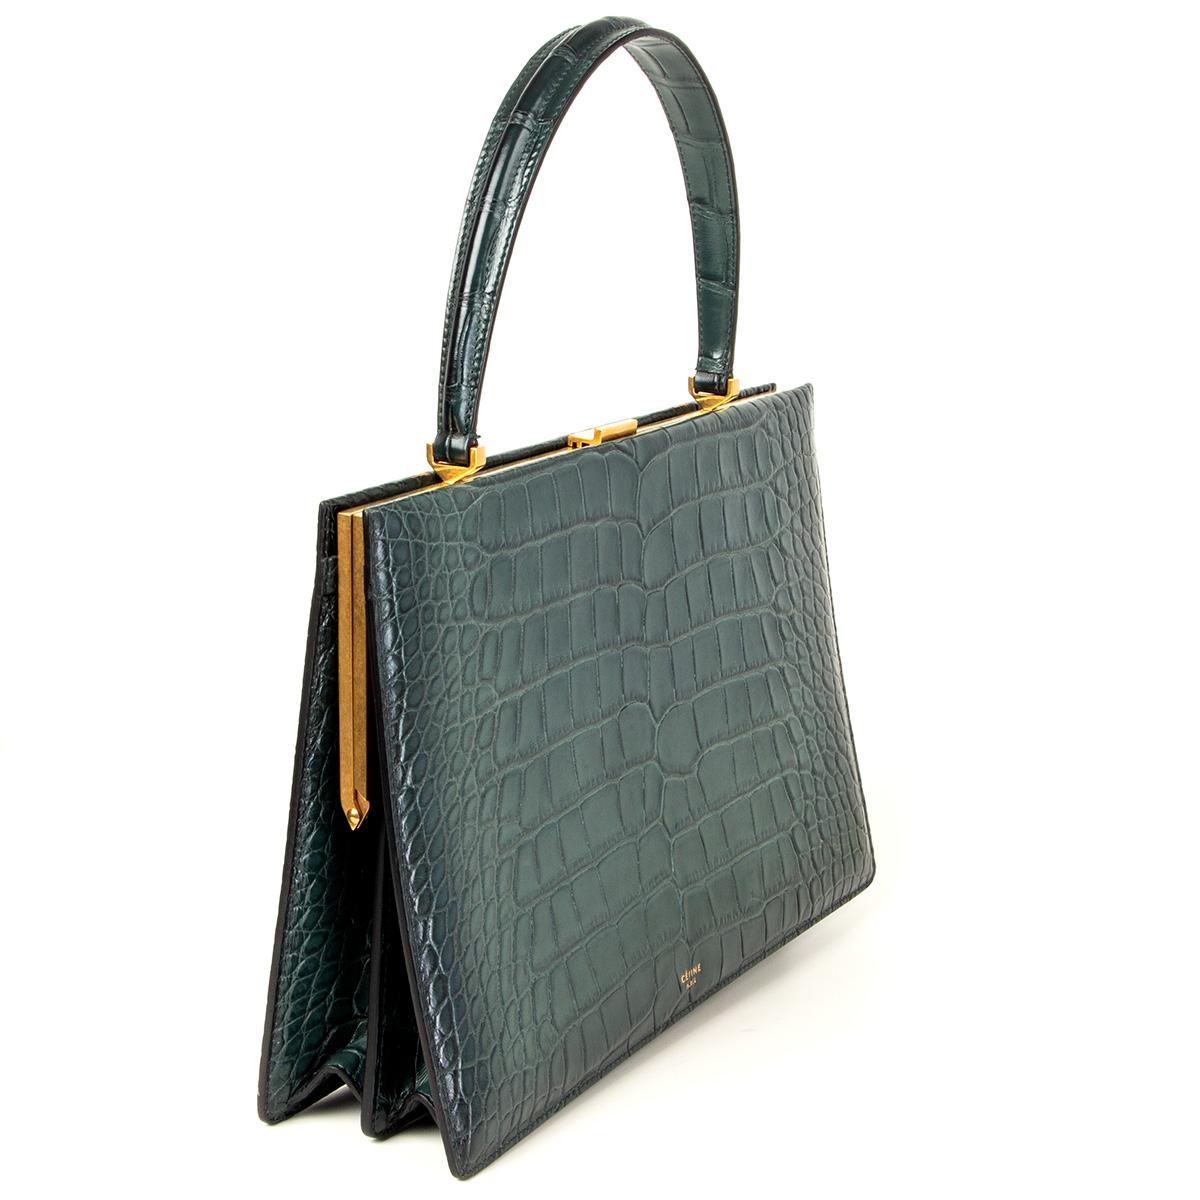 100% authentic Céline Medium Clasp Bag IN Cypress green crocodile and gold-tone hardware. Lined in cypress green lambskin and divided in three compartments with a zipper pocket in the middle. Has been carried and is in excellent condition. Comes